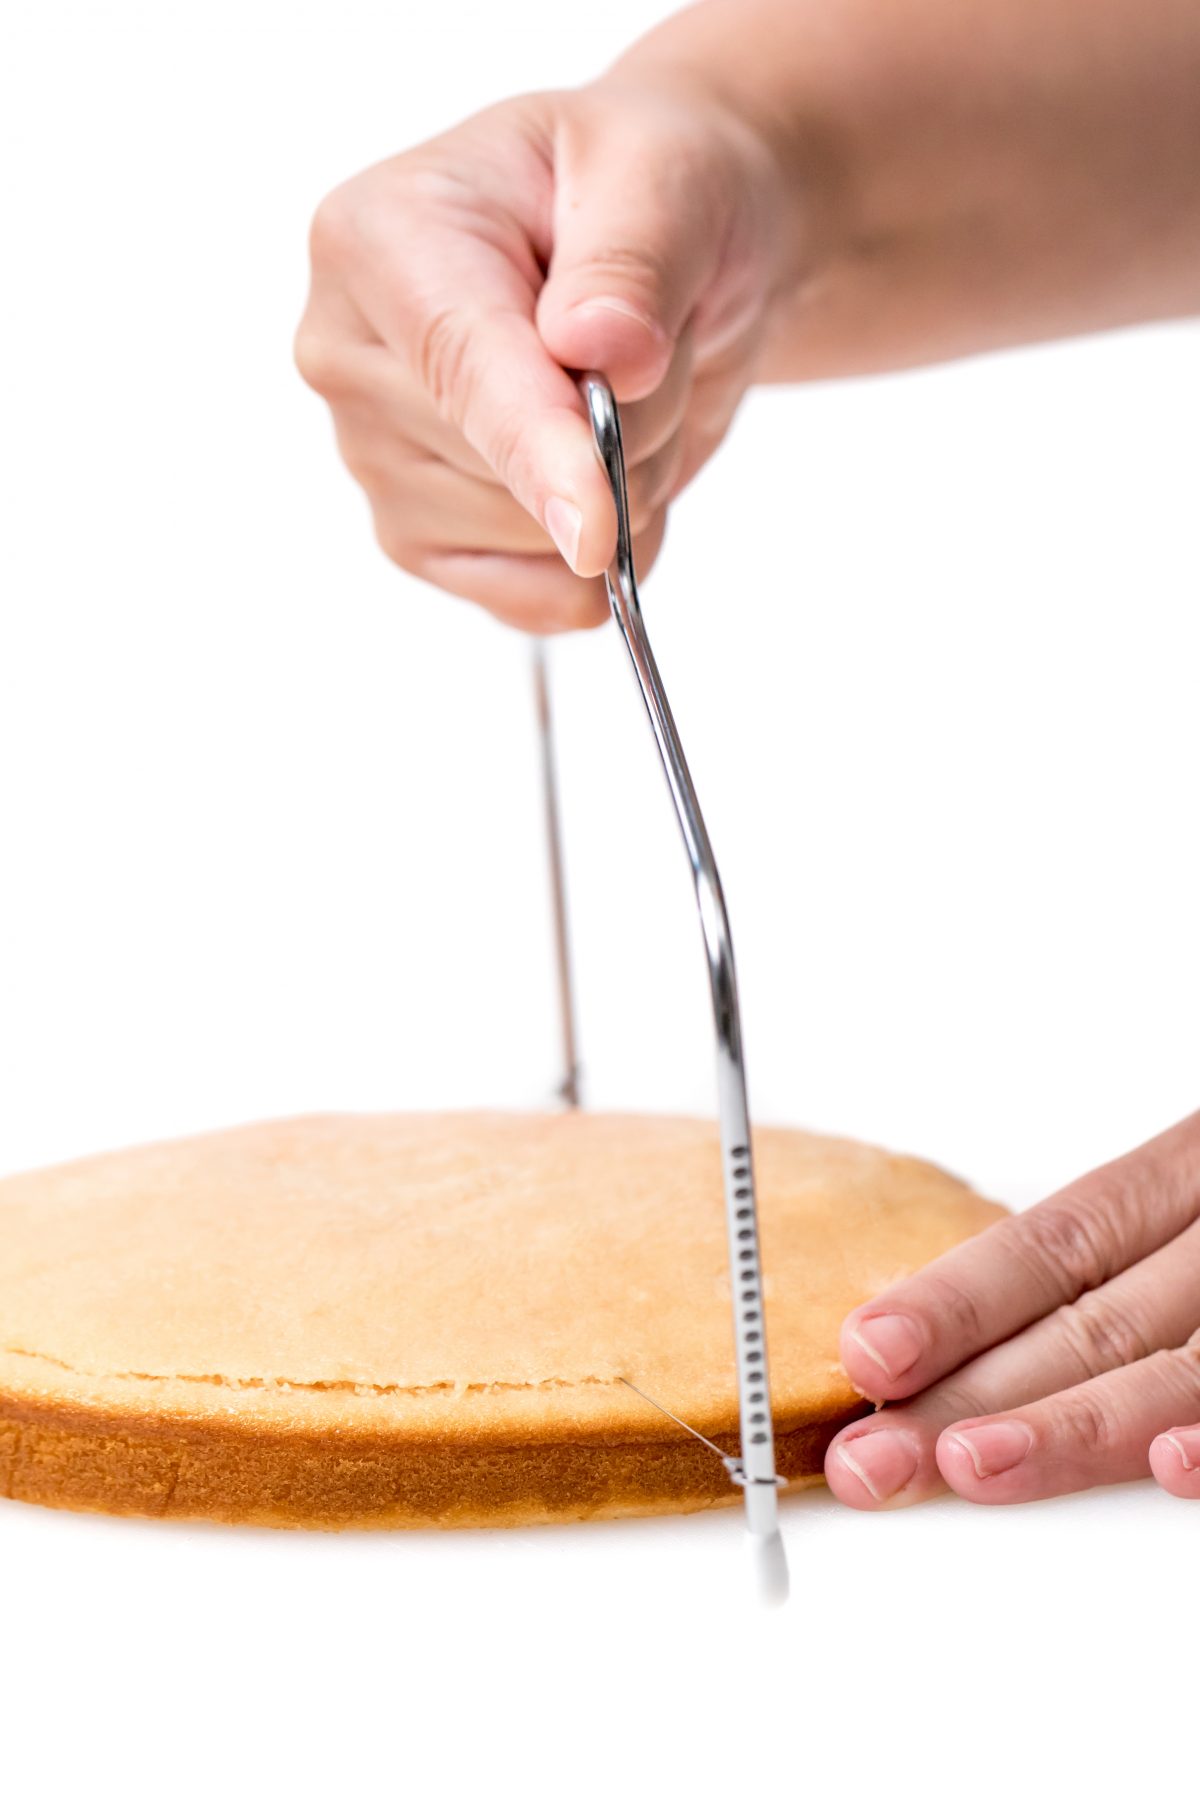 Slice thick layer off top of each cake layer to create flat surface